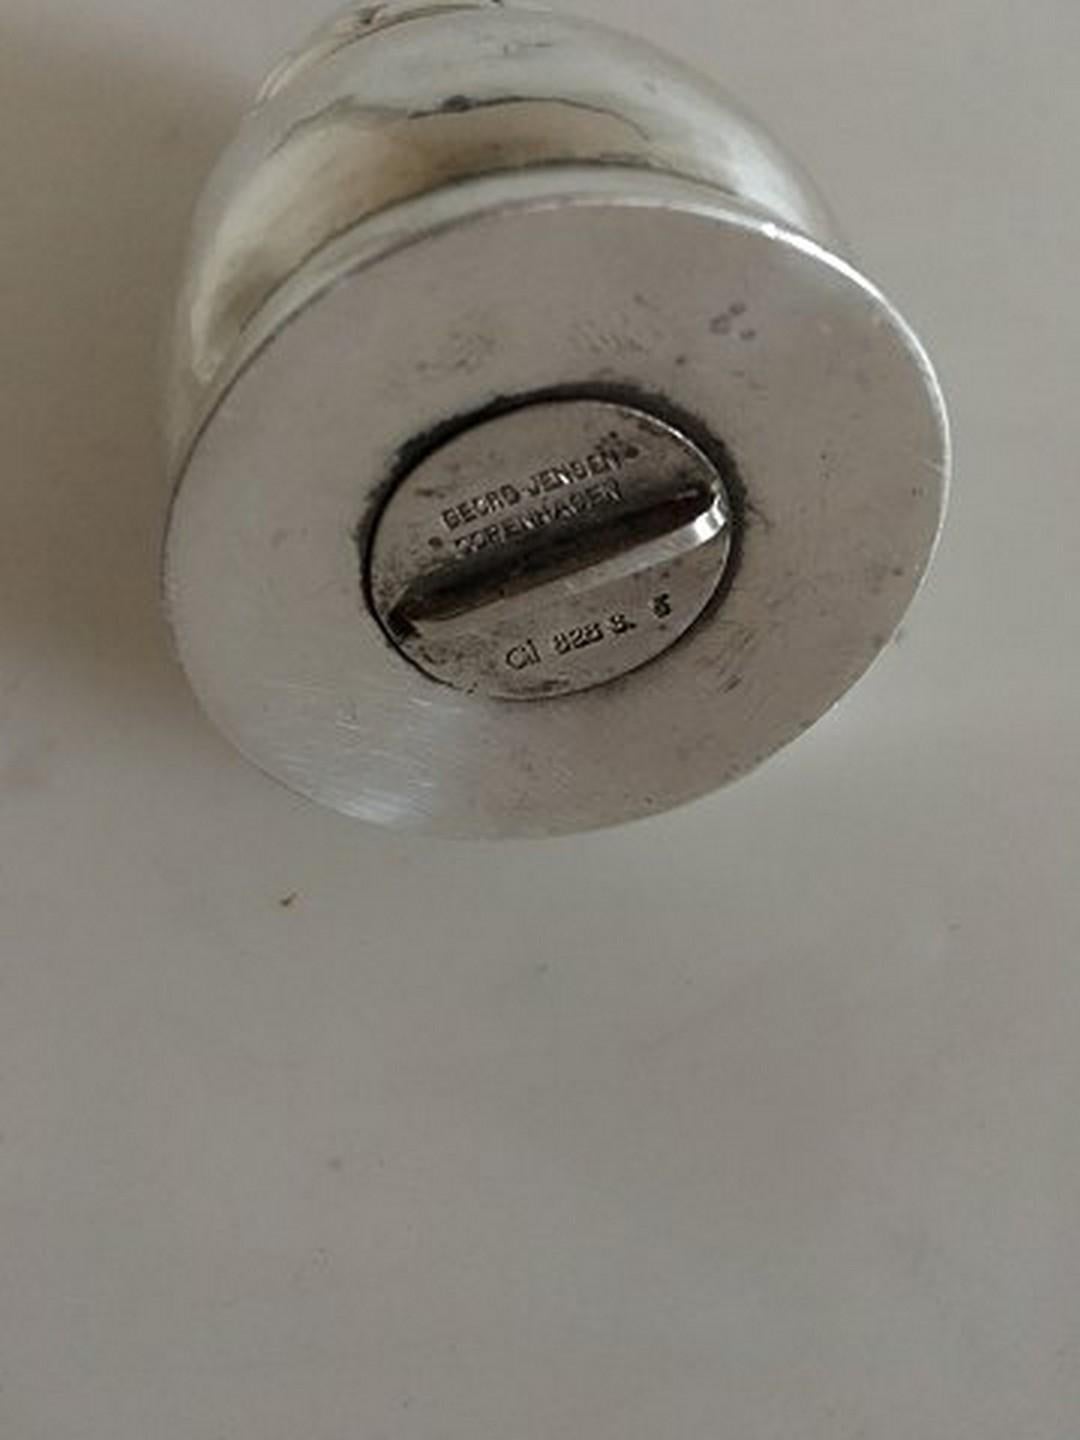 Danish Georg Jensen Silver Pepper Shaker No 5 Early Pepper Shaker in Nice Condition For Sale